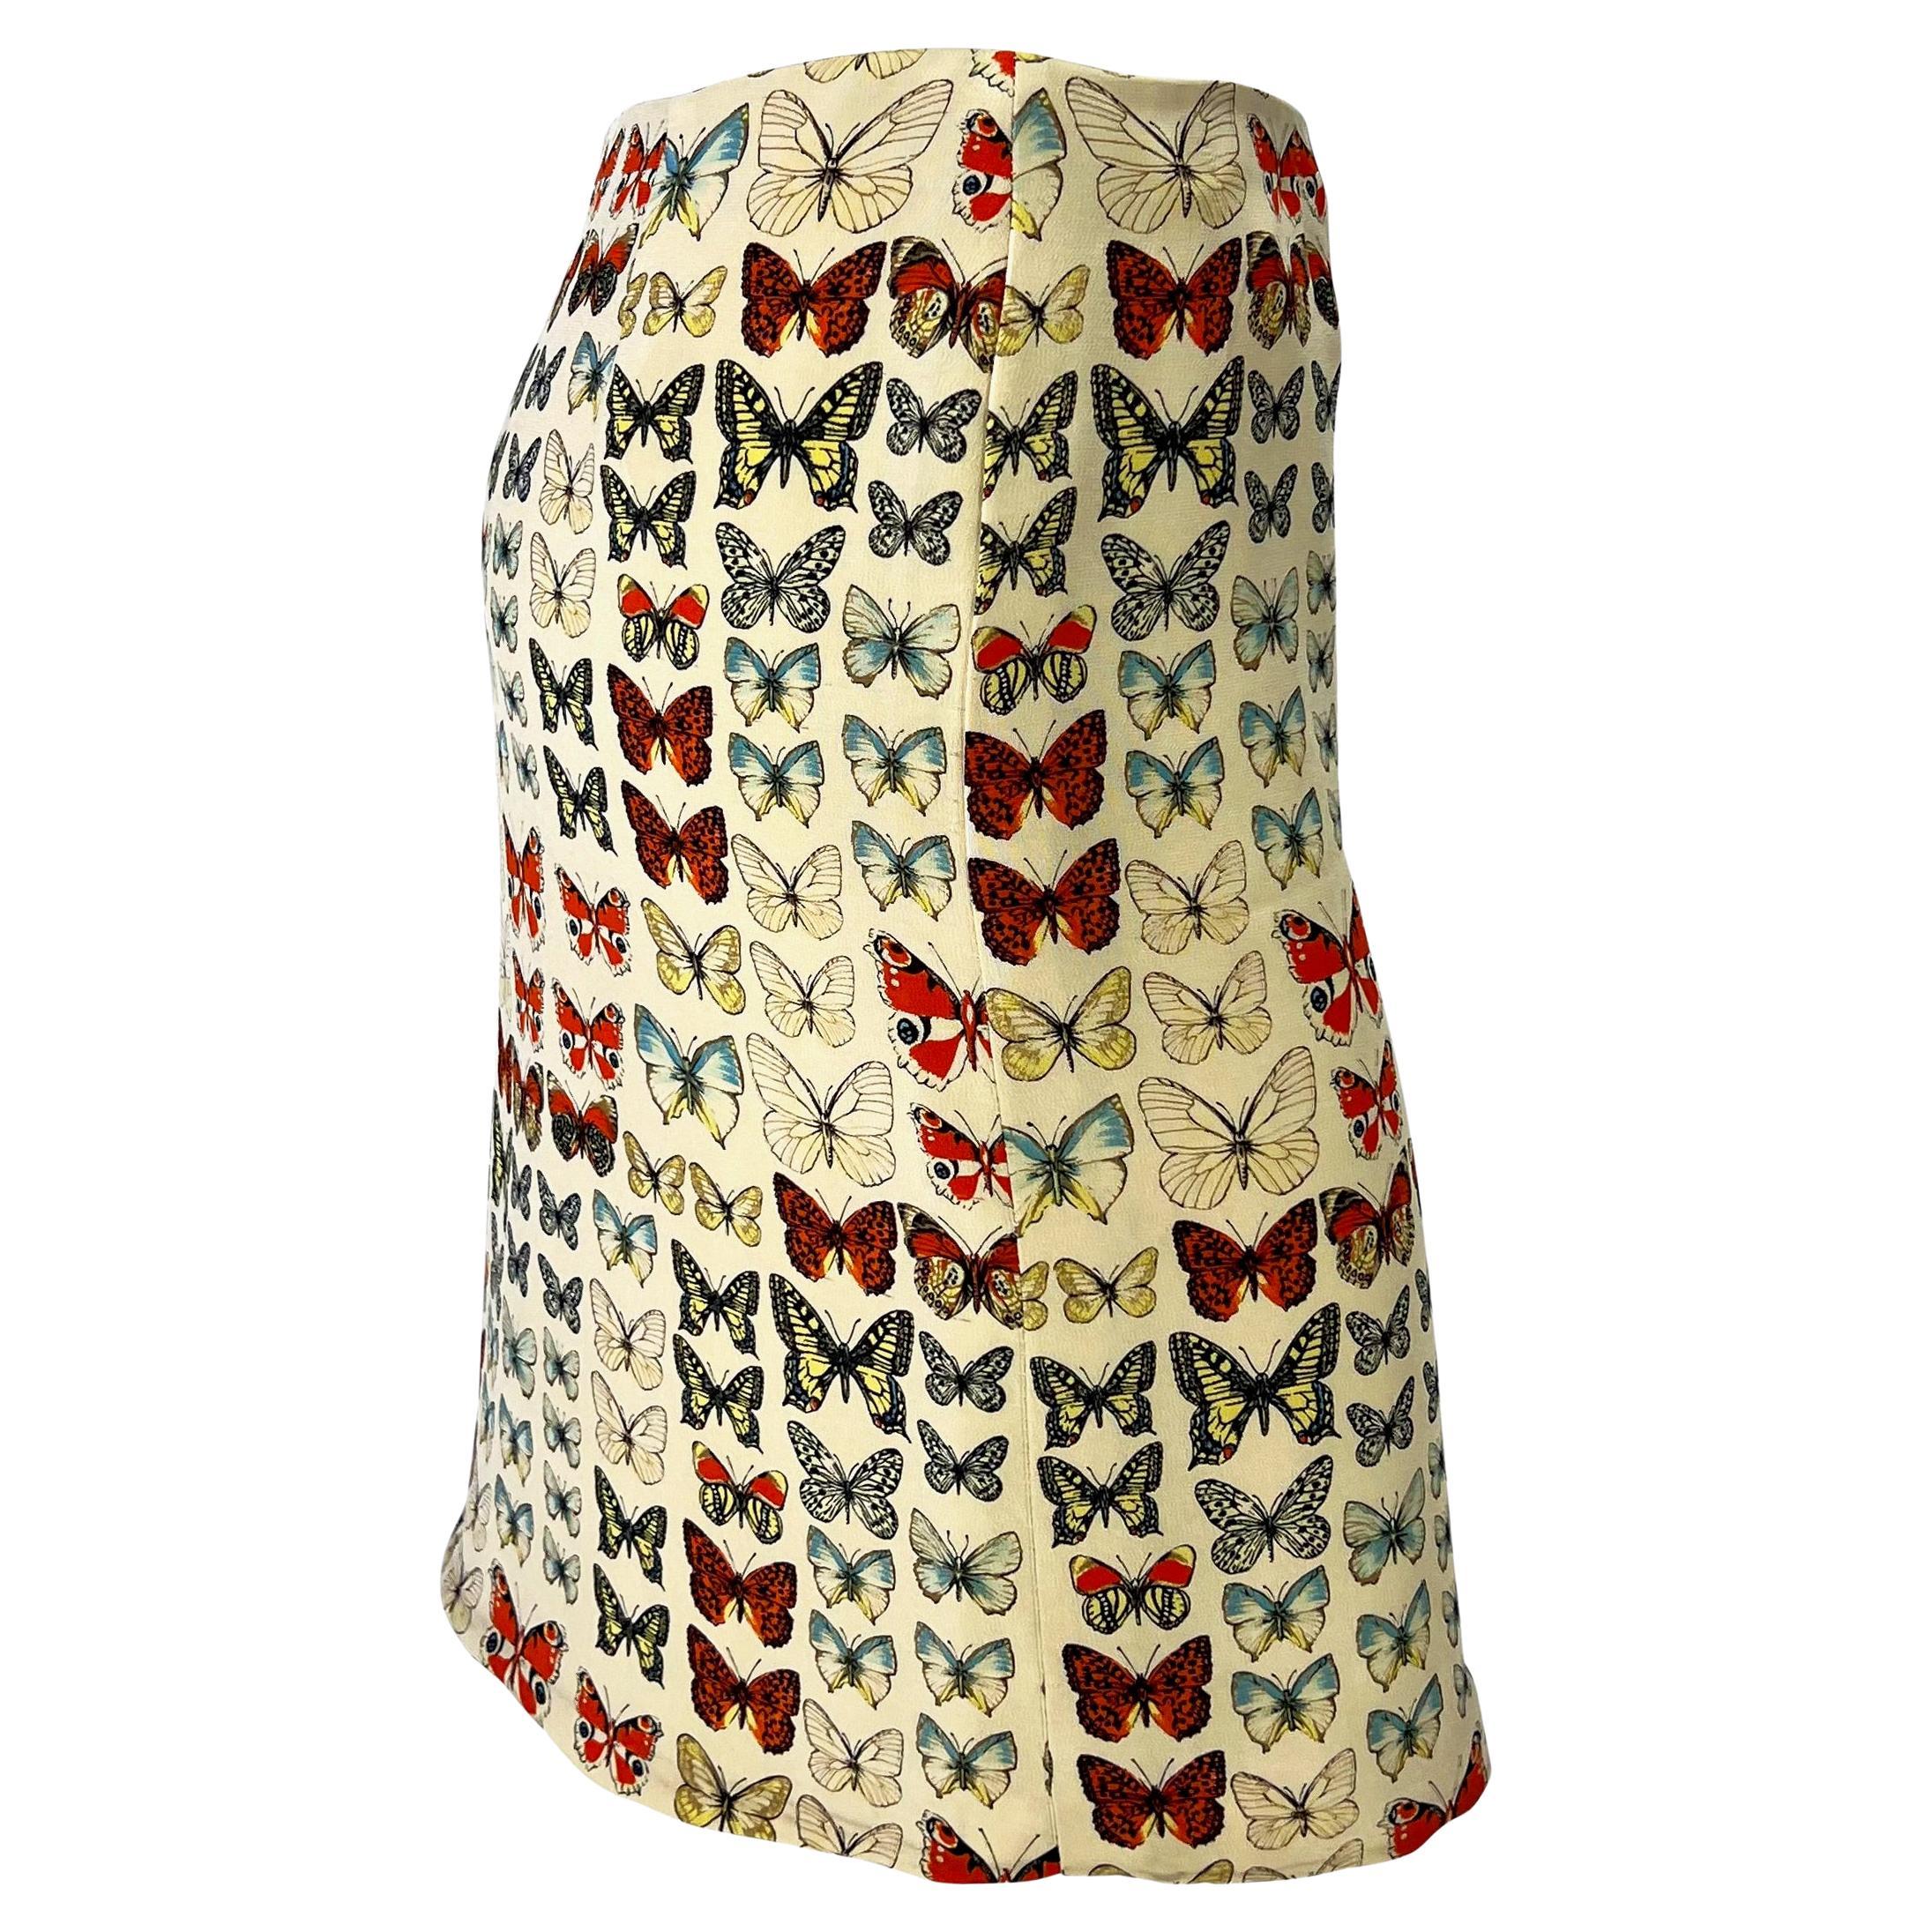 S/S 1995 Gianni Versace Couture Butterfly Moth Print Cream Mini Skirt ...